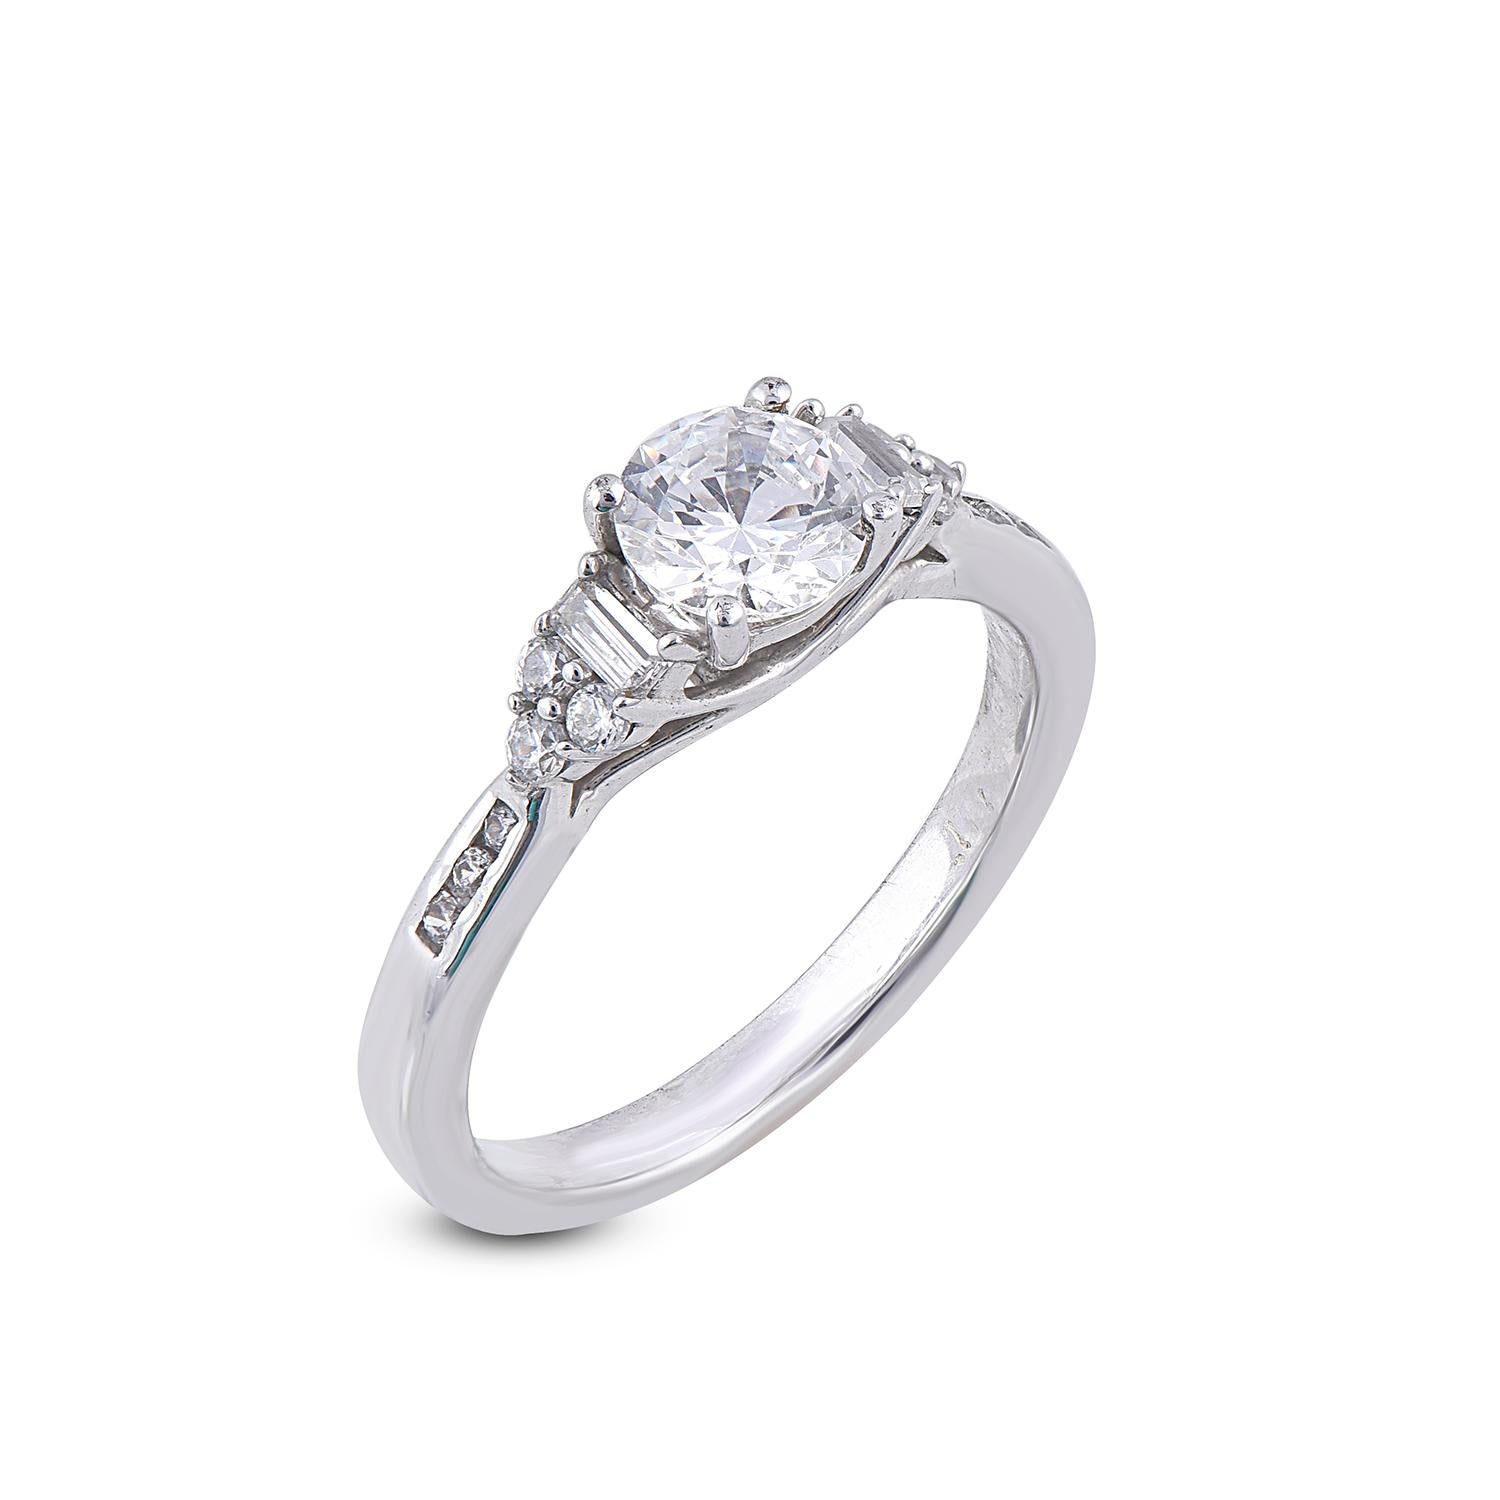 Passionate and indulgent, this round and baguette diamond ring features a ravishing in 13 round diamond and 2 Baguette with 0.80 ct centre stone and 0.20 ct of diamond. Expertly Crafted with 18 Karat white gold in high polish finish and set with 13